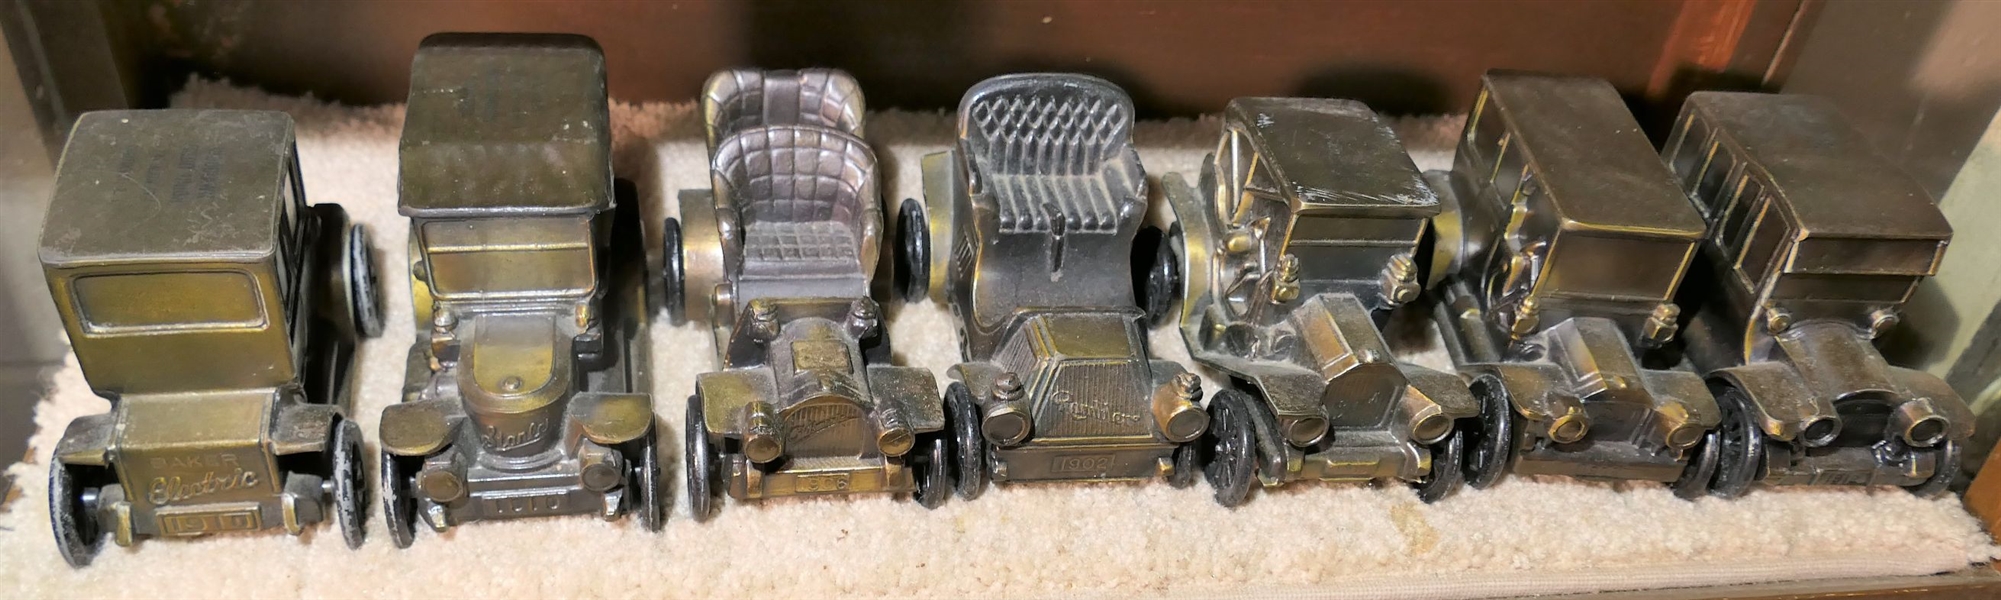 7 Metal Car Banks - Some Advertising - including Southeaster State Bank, Lockwood National Bank, and Woodlawn Credit Union  - Banks Made by Banthrico